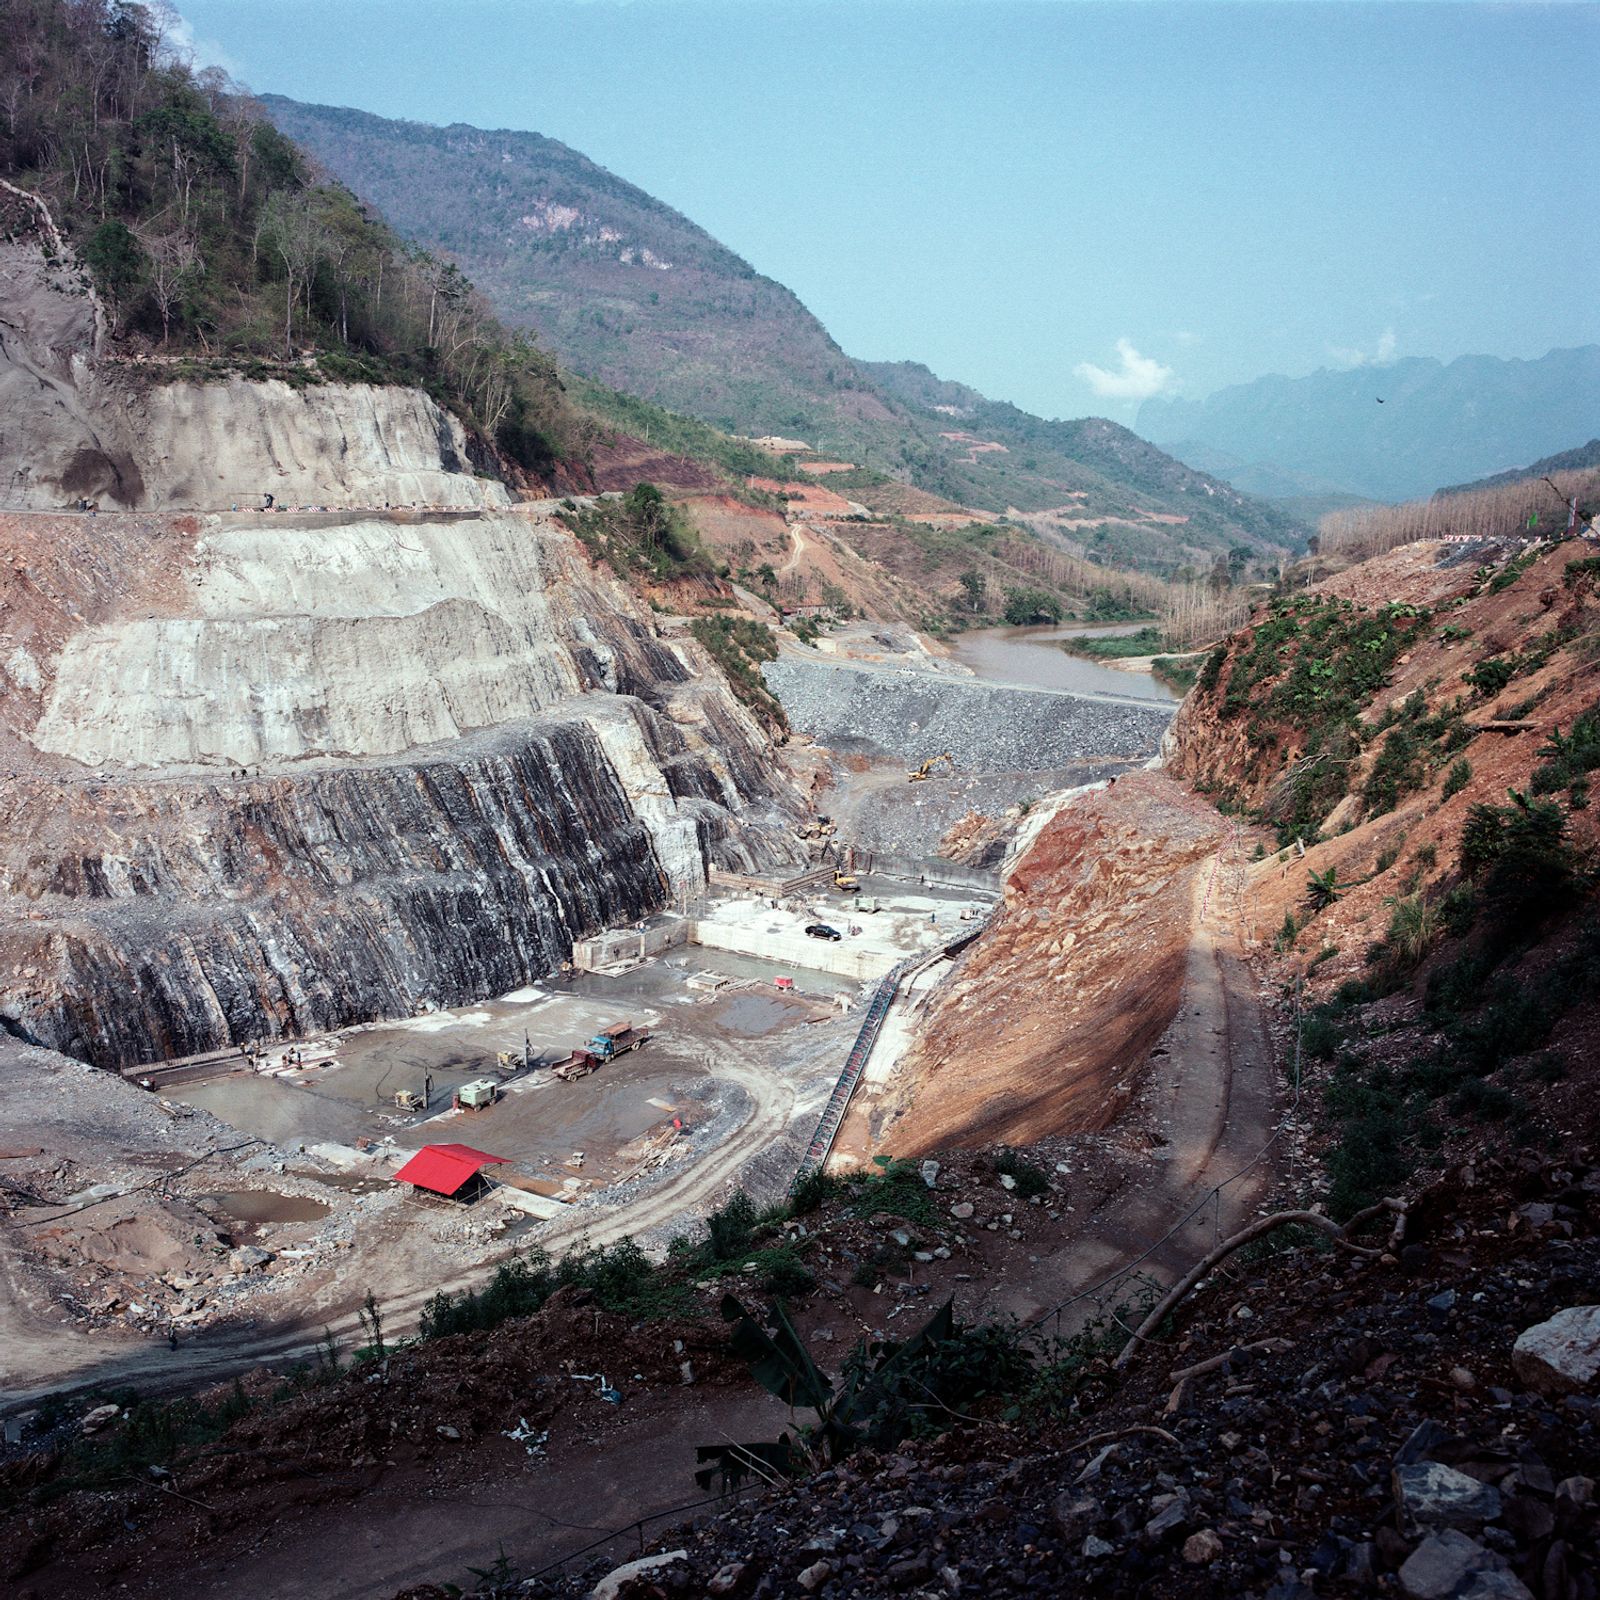 © Huiying Ore - Image from the Mekong, The mother of rivers photography project